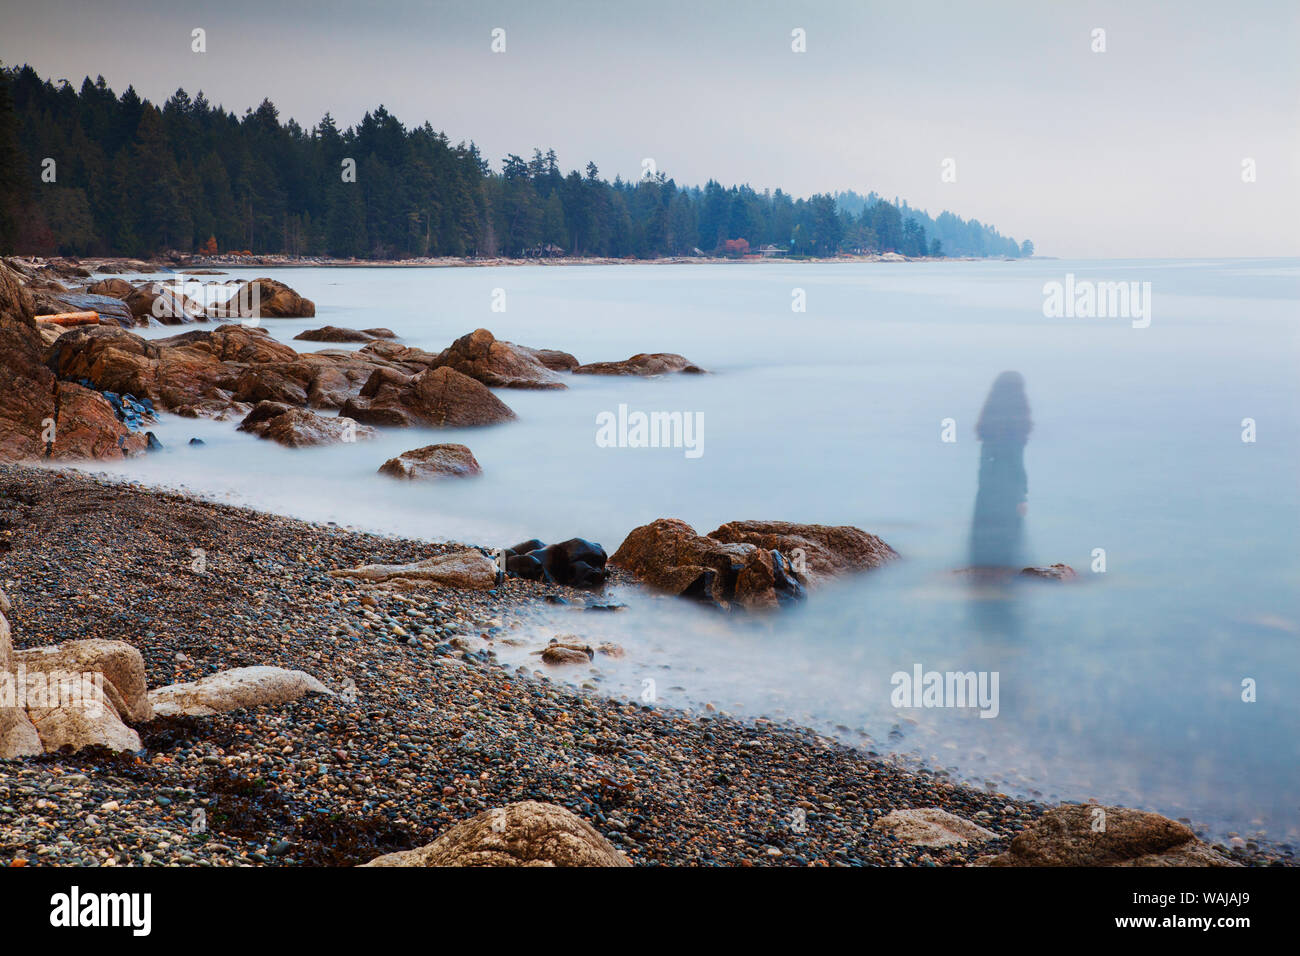 Long exposure of a ghostly image of woman on the beach in Sechelt, British Columbia, Canada Stock Photo